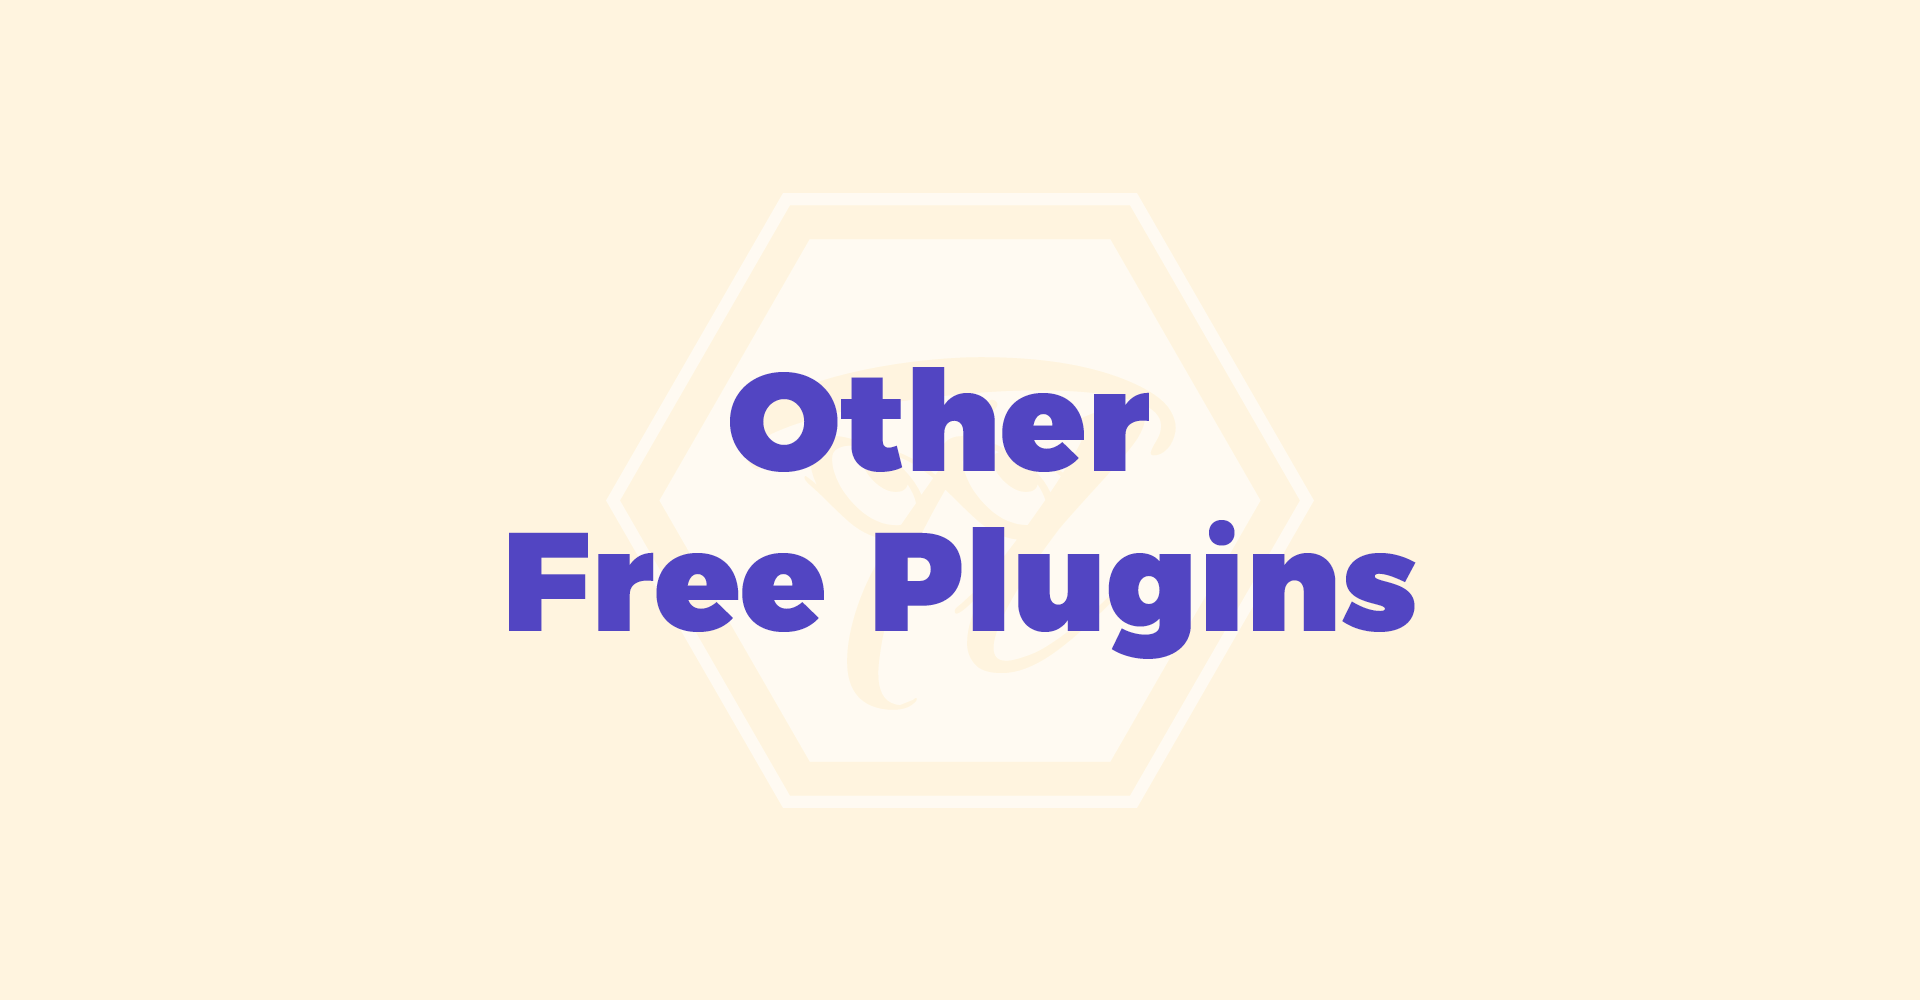 Other Free Plugins Unihost